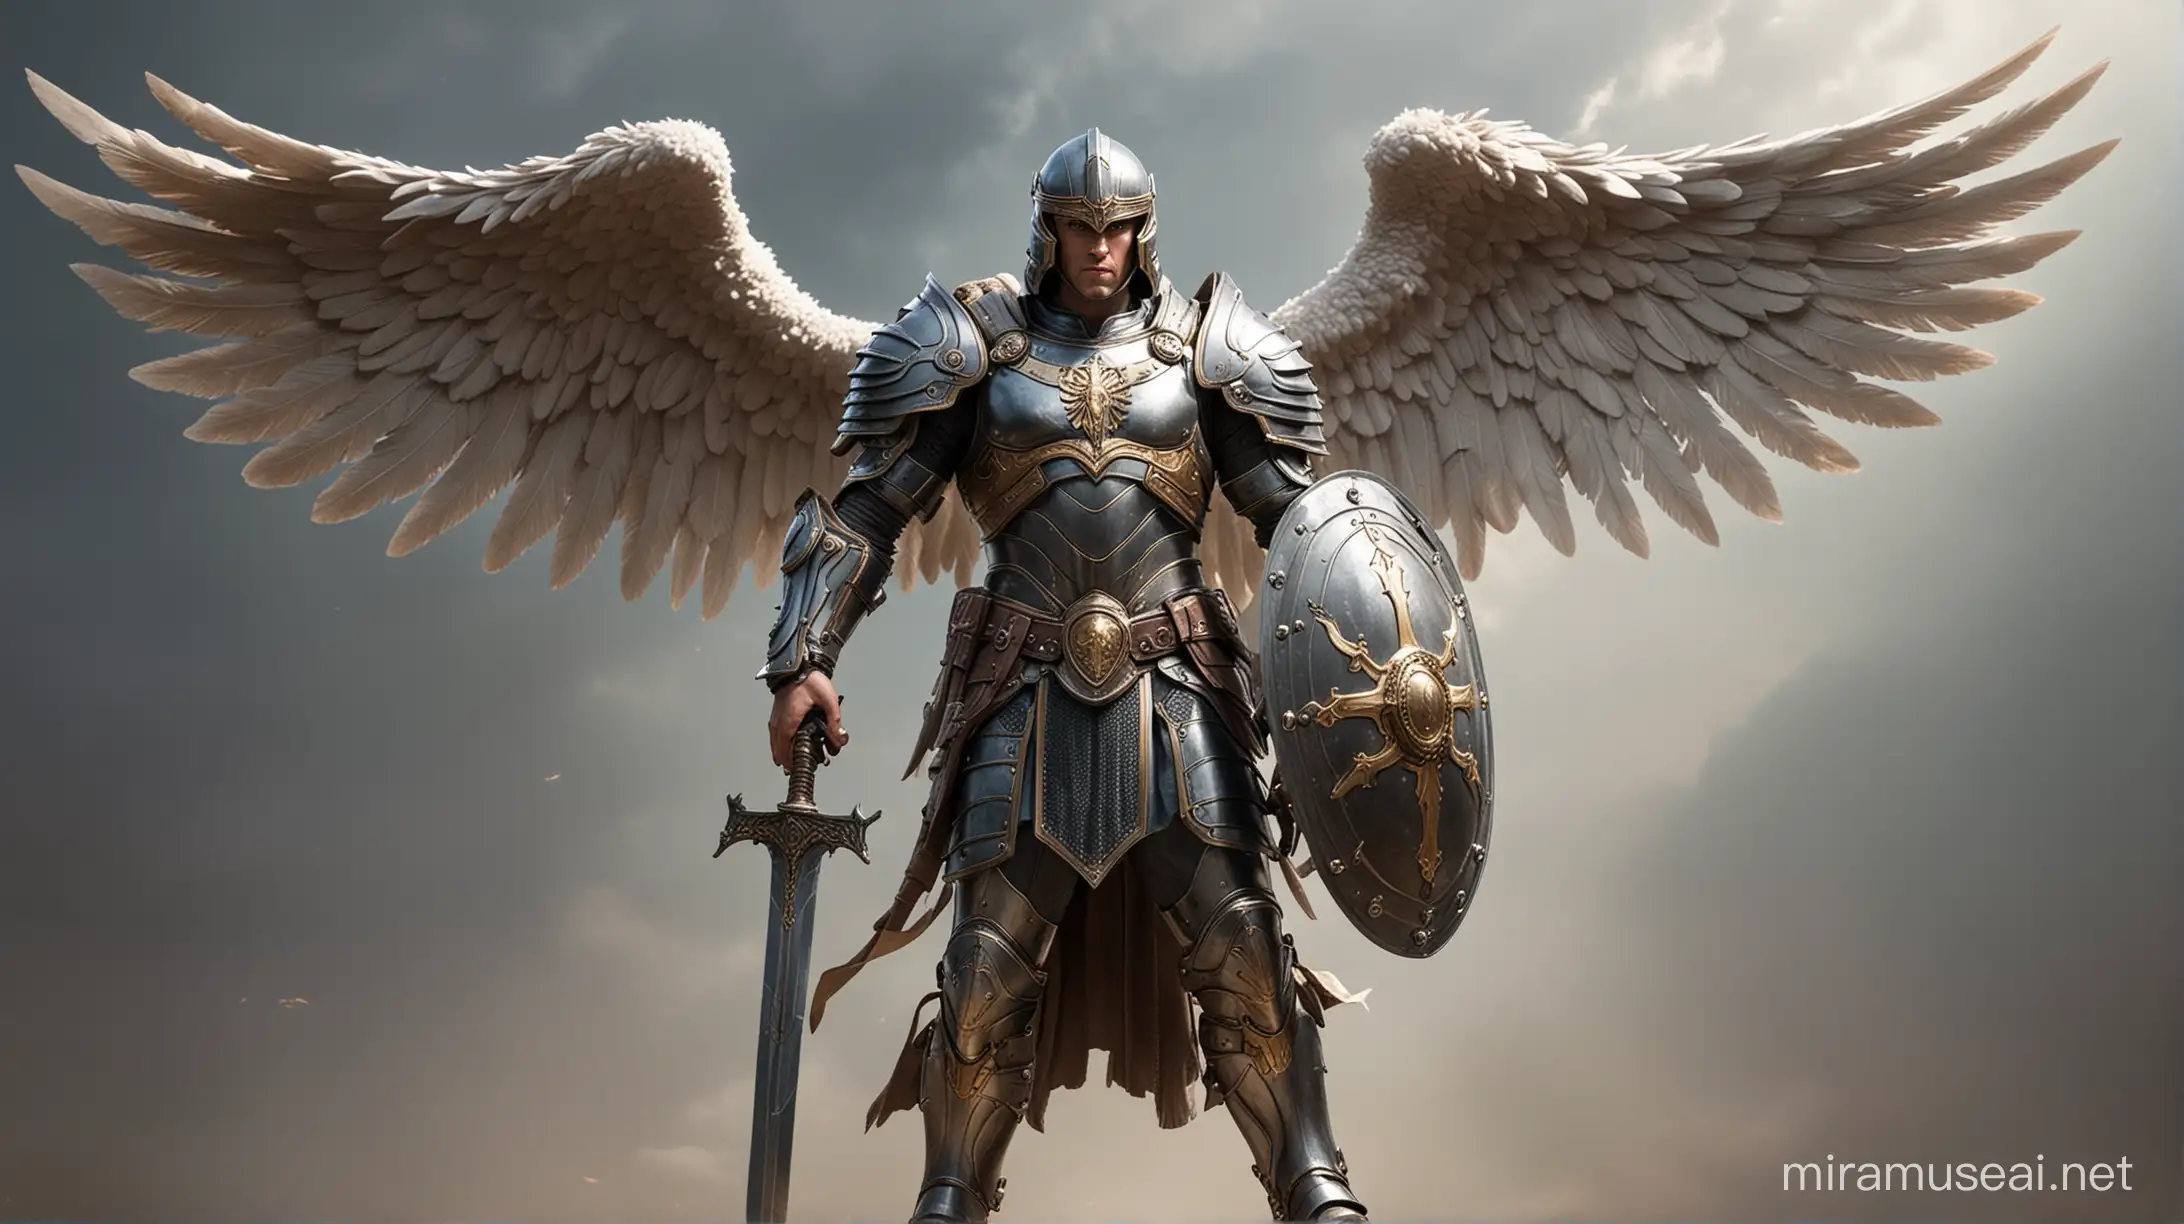 Archangel Michael wearing A full body armor, with helmet, sword and shield. Ready for final battle.